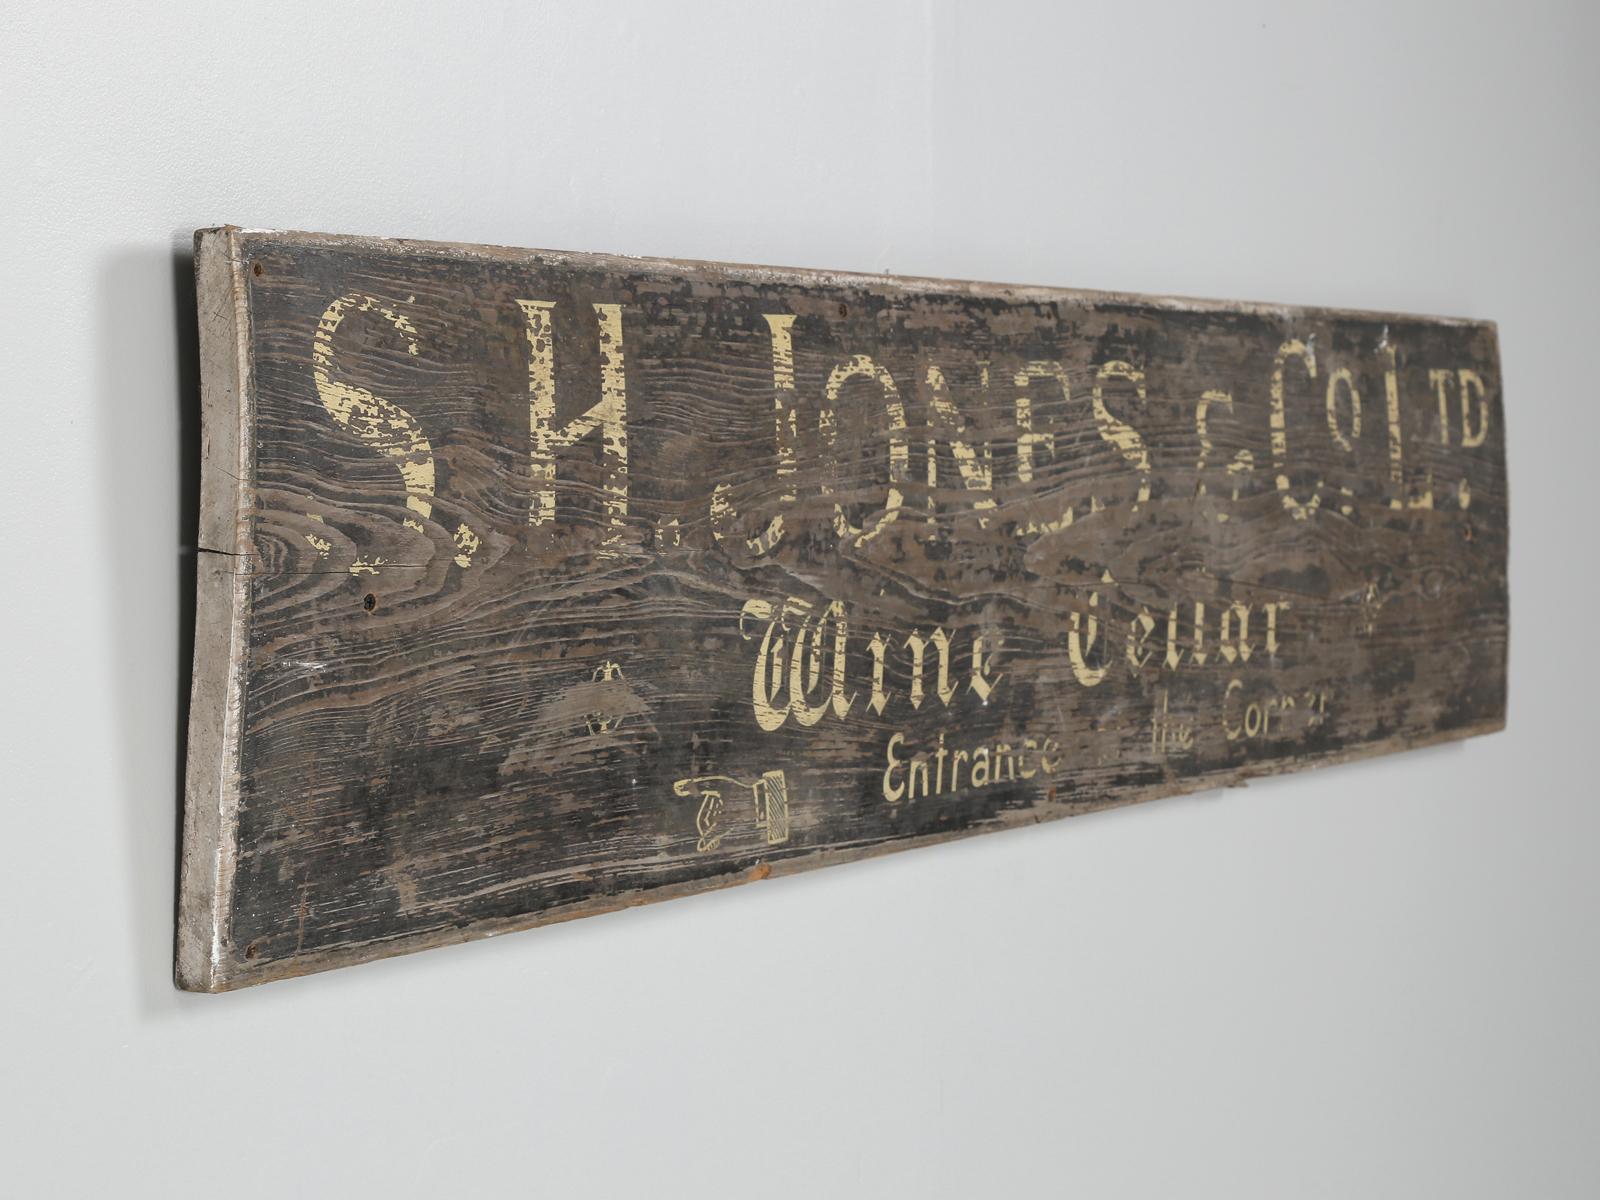 In collecting and selling antiques for decades, we have never come across a real antique Wine Cellar Sign, let alone one that is still in it's original paint and has never been restored. S.H. Jones WInes Ltd first opened in 1848 and is still in the